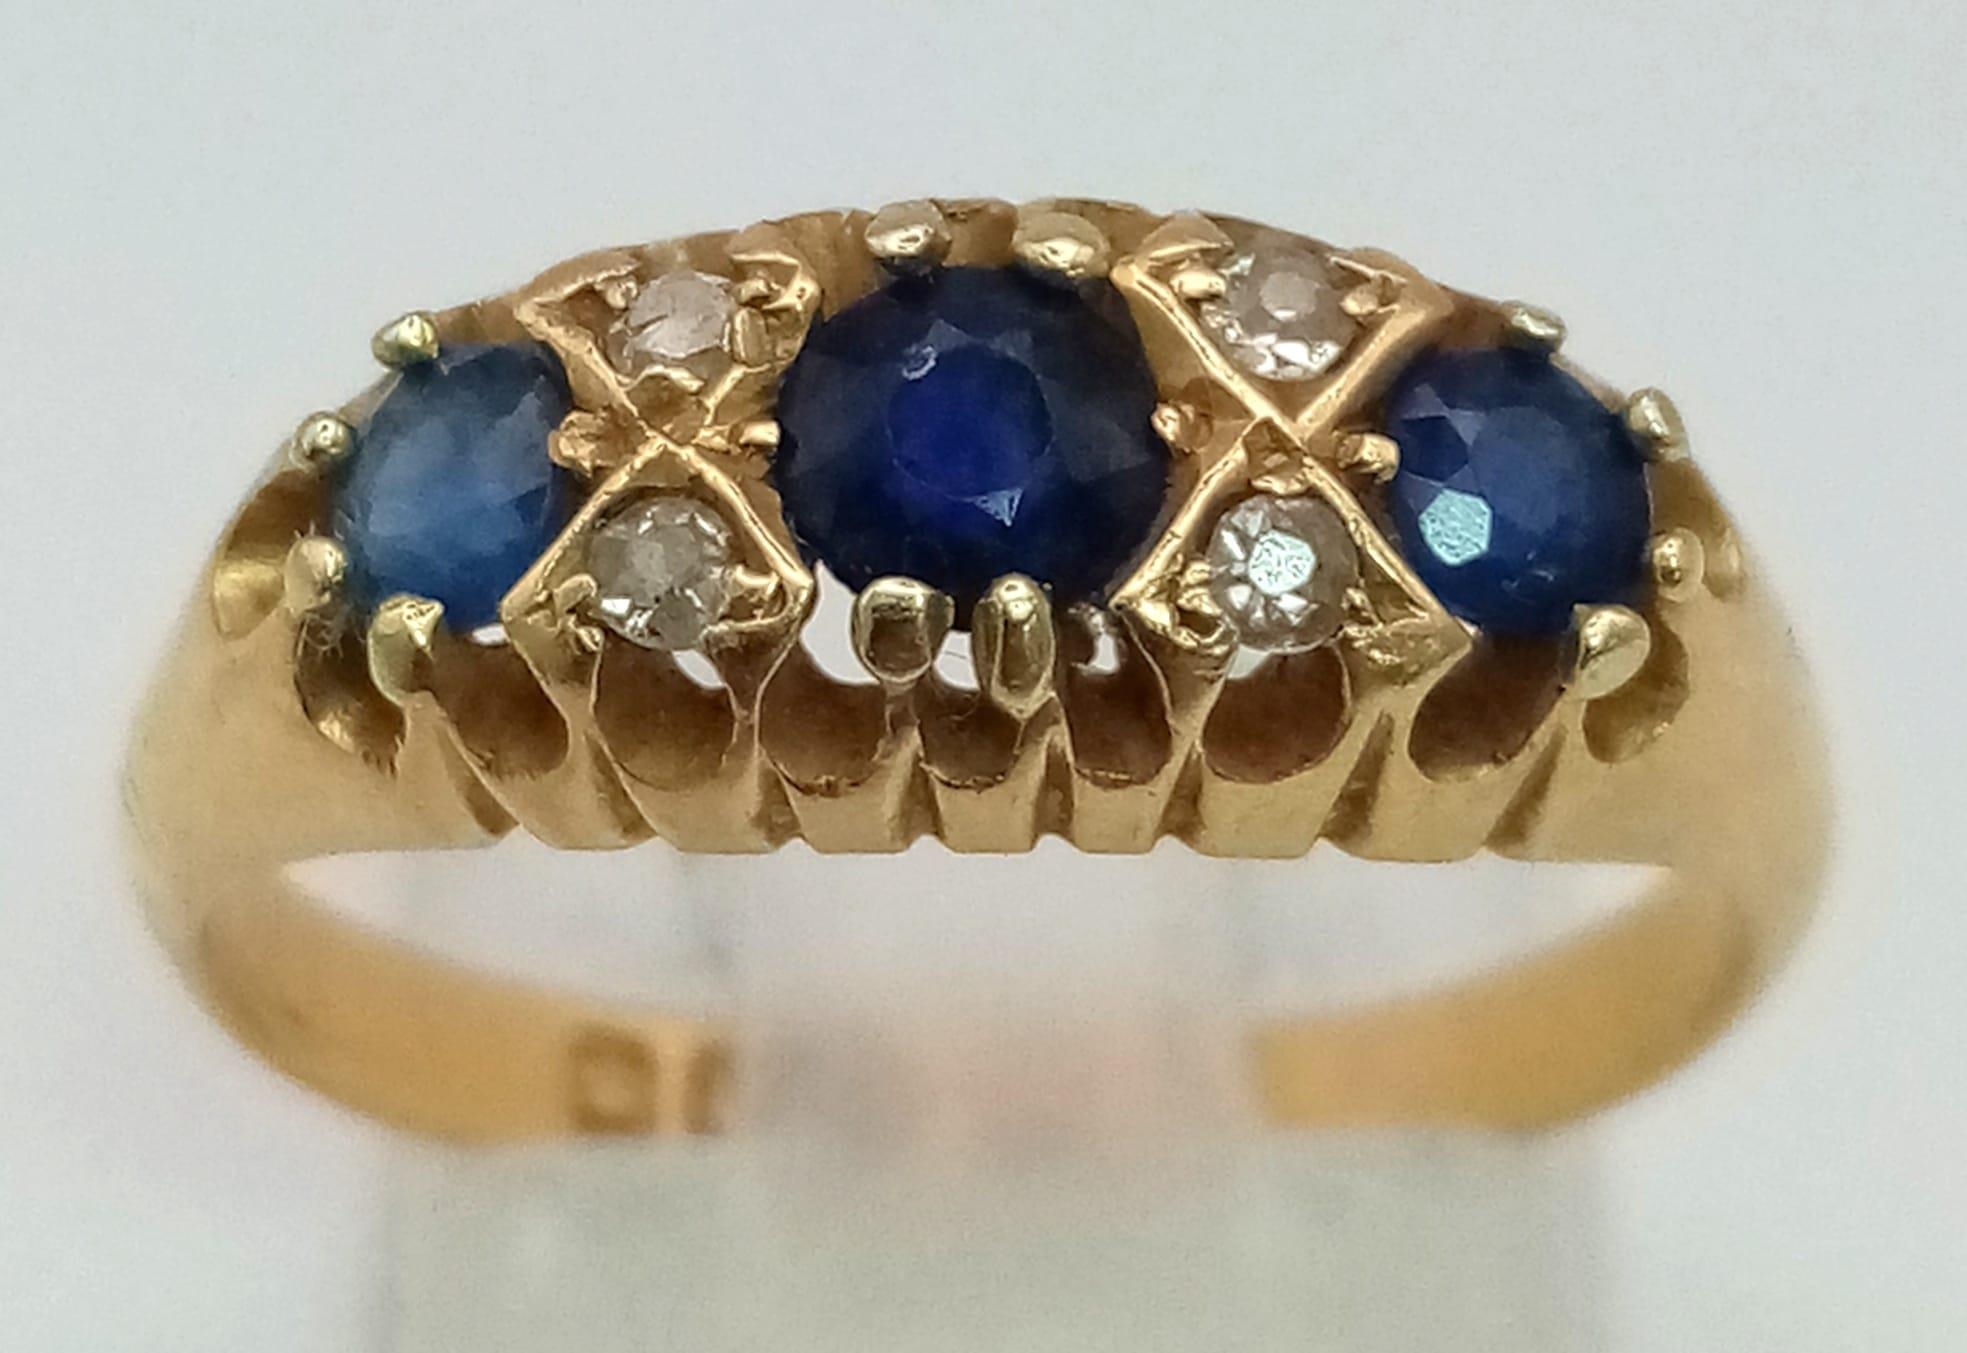 An antique, 18 K yellow gold ring with old cut diamonds and sapphires (0.65 carats). Hallmarked